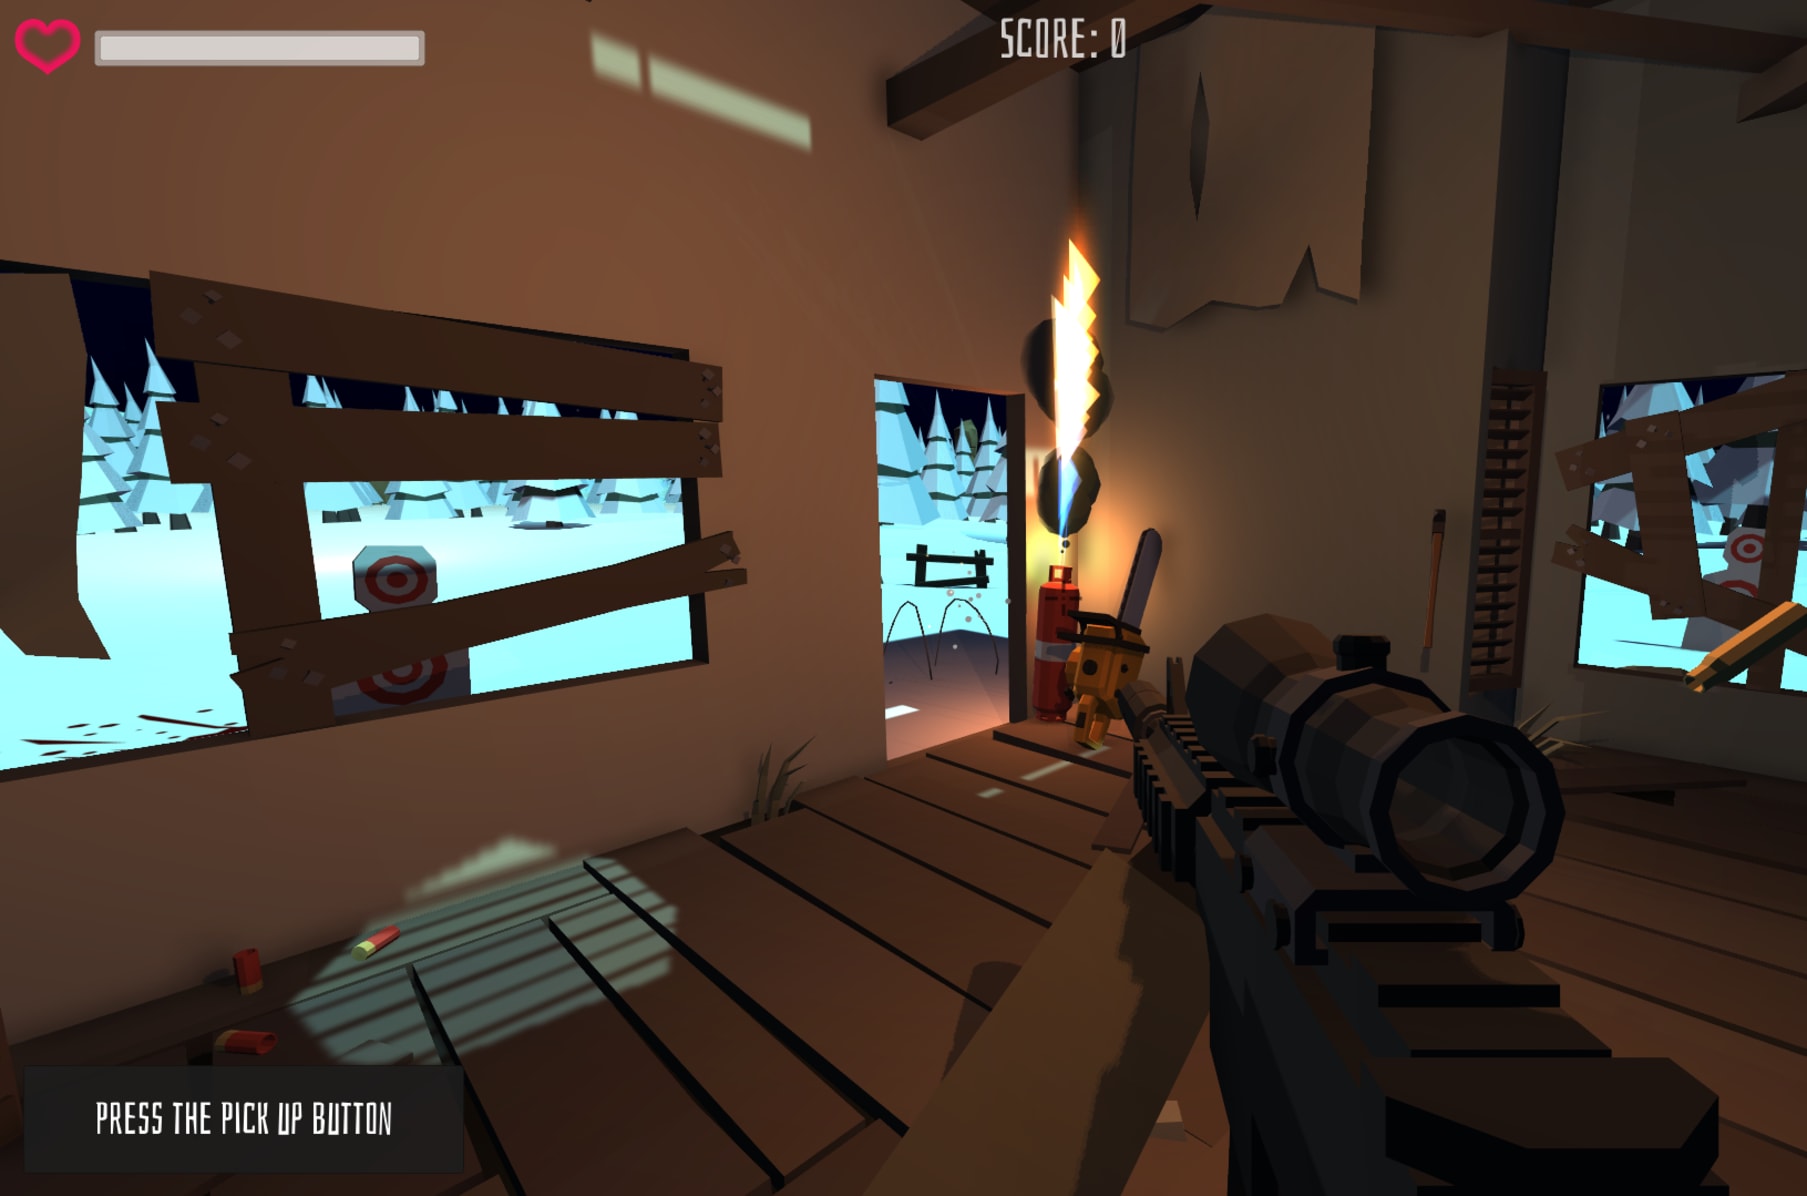 Fully playable In-browser FPS games : r/howdidtheycodeit